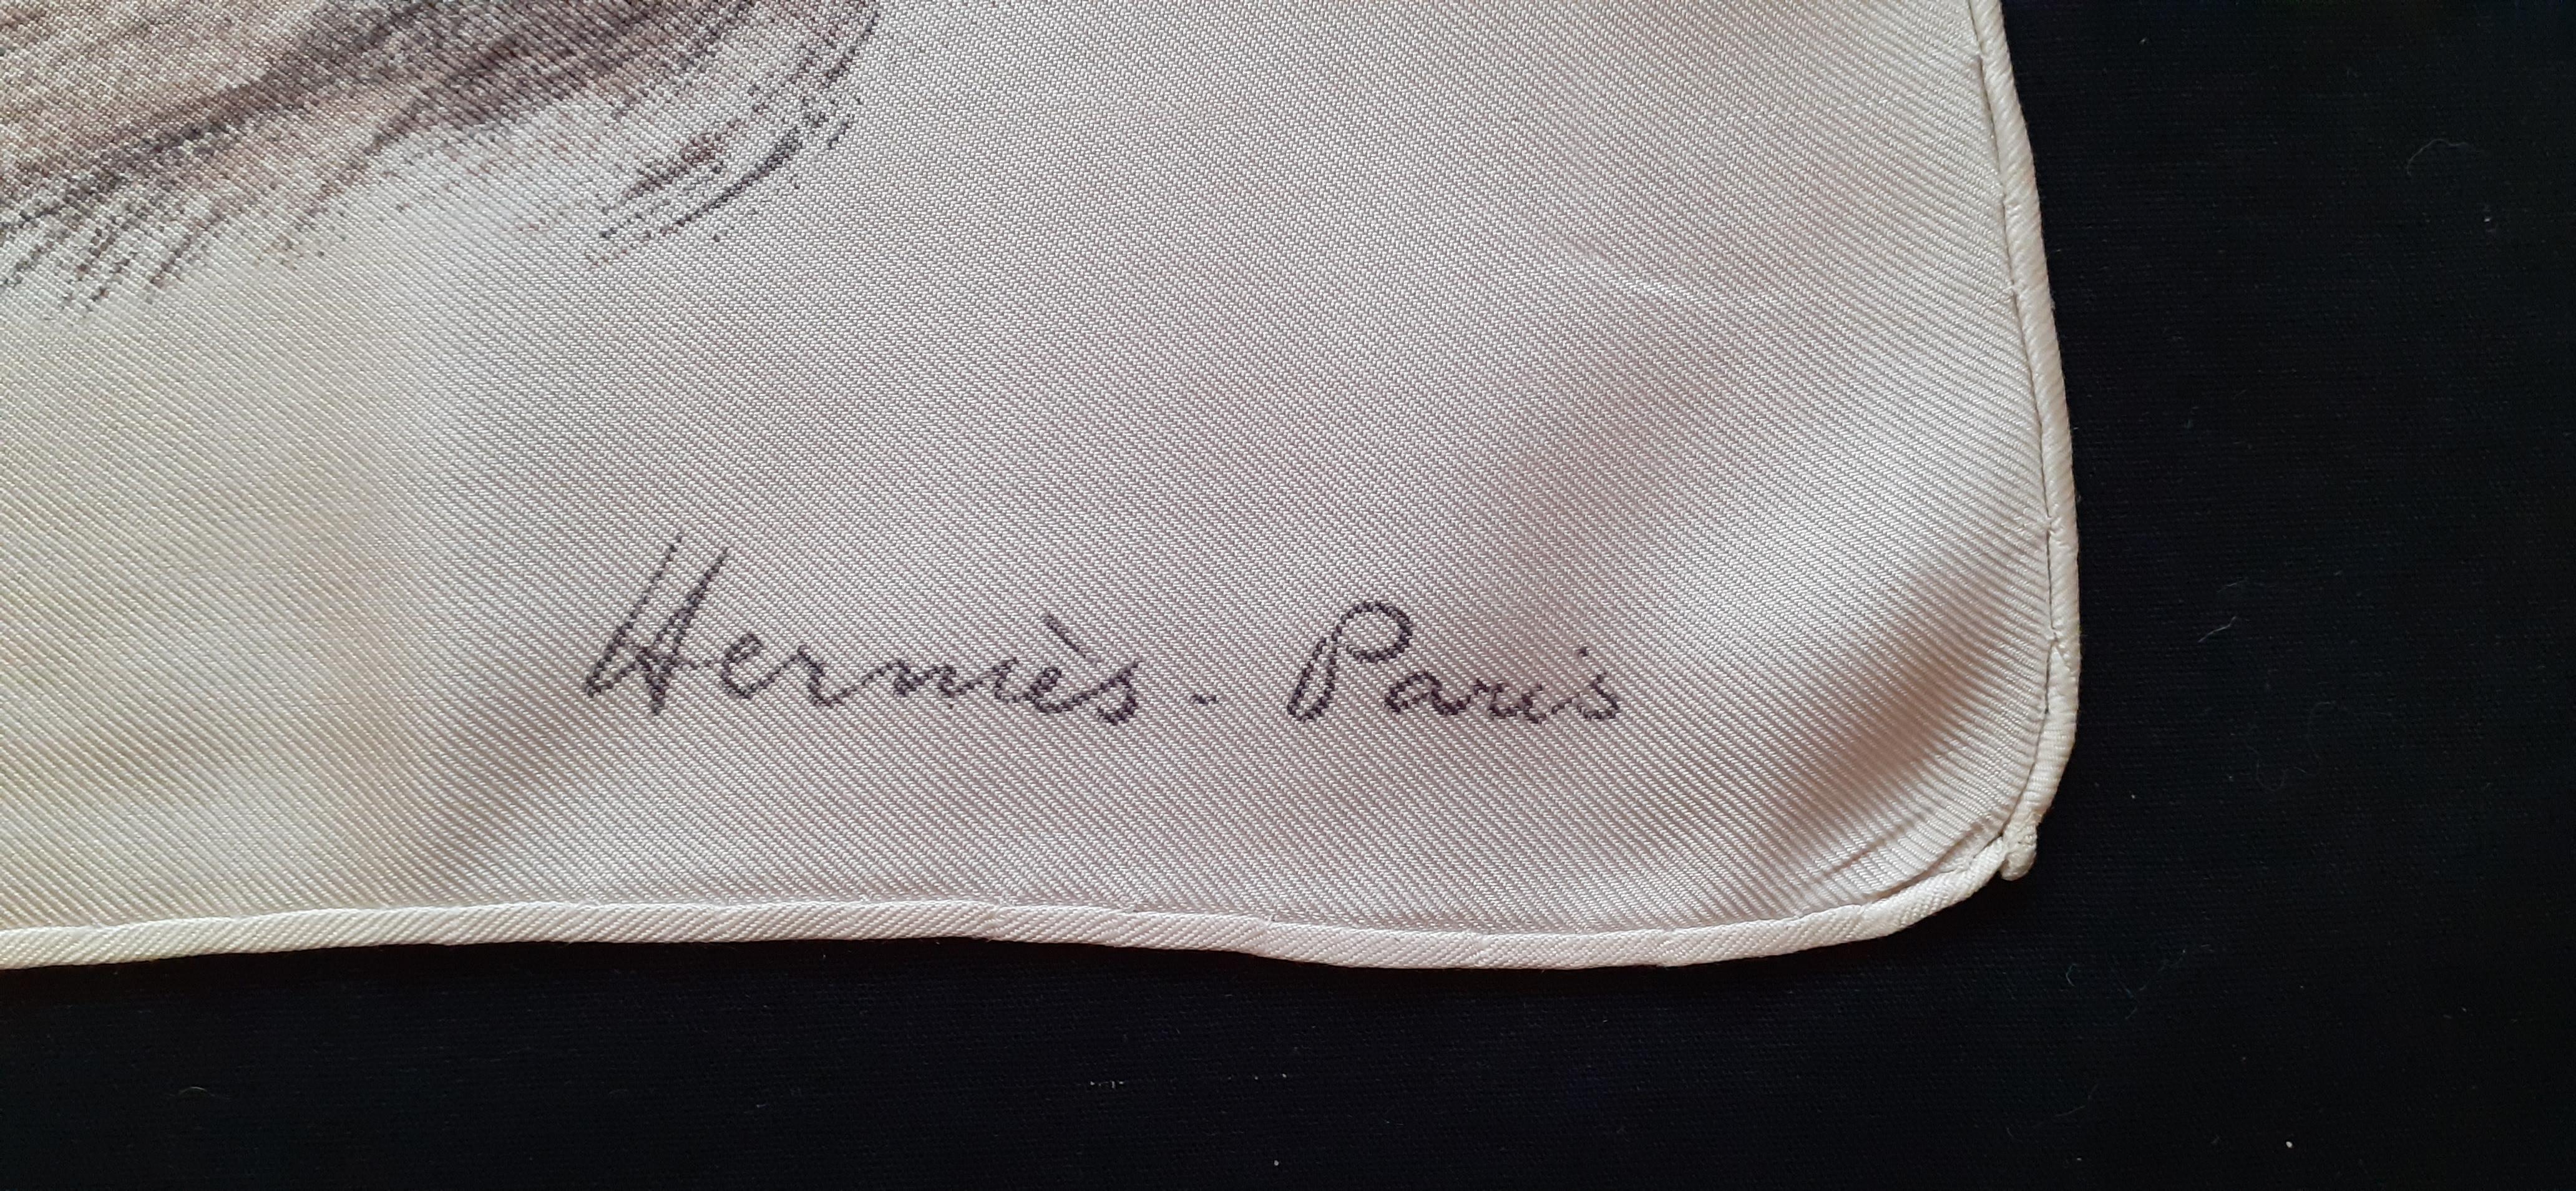 Extremely Rare Authentic Hermès Vintage Scarf

Pattern: Chats Persans (Persian Cats)

Designed in 1956 by Jacques de Poret (only 1 issue)

One of the rarest Hermès scarves ever ! A grail !

Can be framed

Made in France

Made of 100%